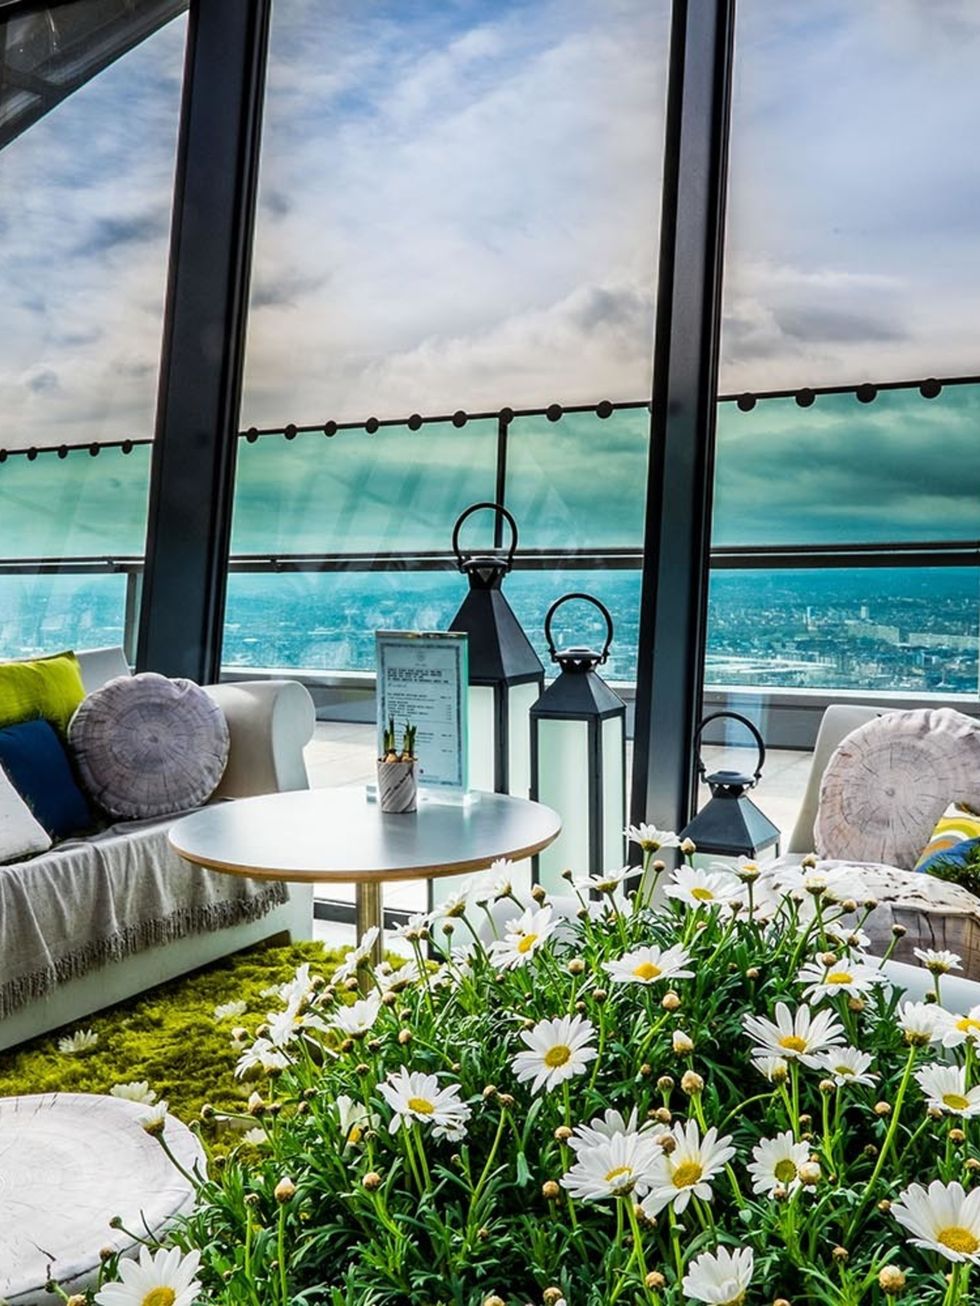 <p>FOOD/DRINK: Eccentric English Country Garden Pop-Up at the Sky Pod</p>

<p>Whats better than a cocktail in an English country garden? Well tell you what: a cocktail in an English country garden 35 floors up. As part of the new pop-up at 20 Fenchurch 